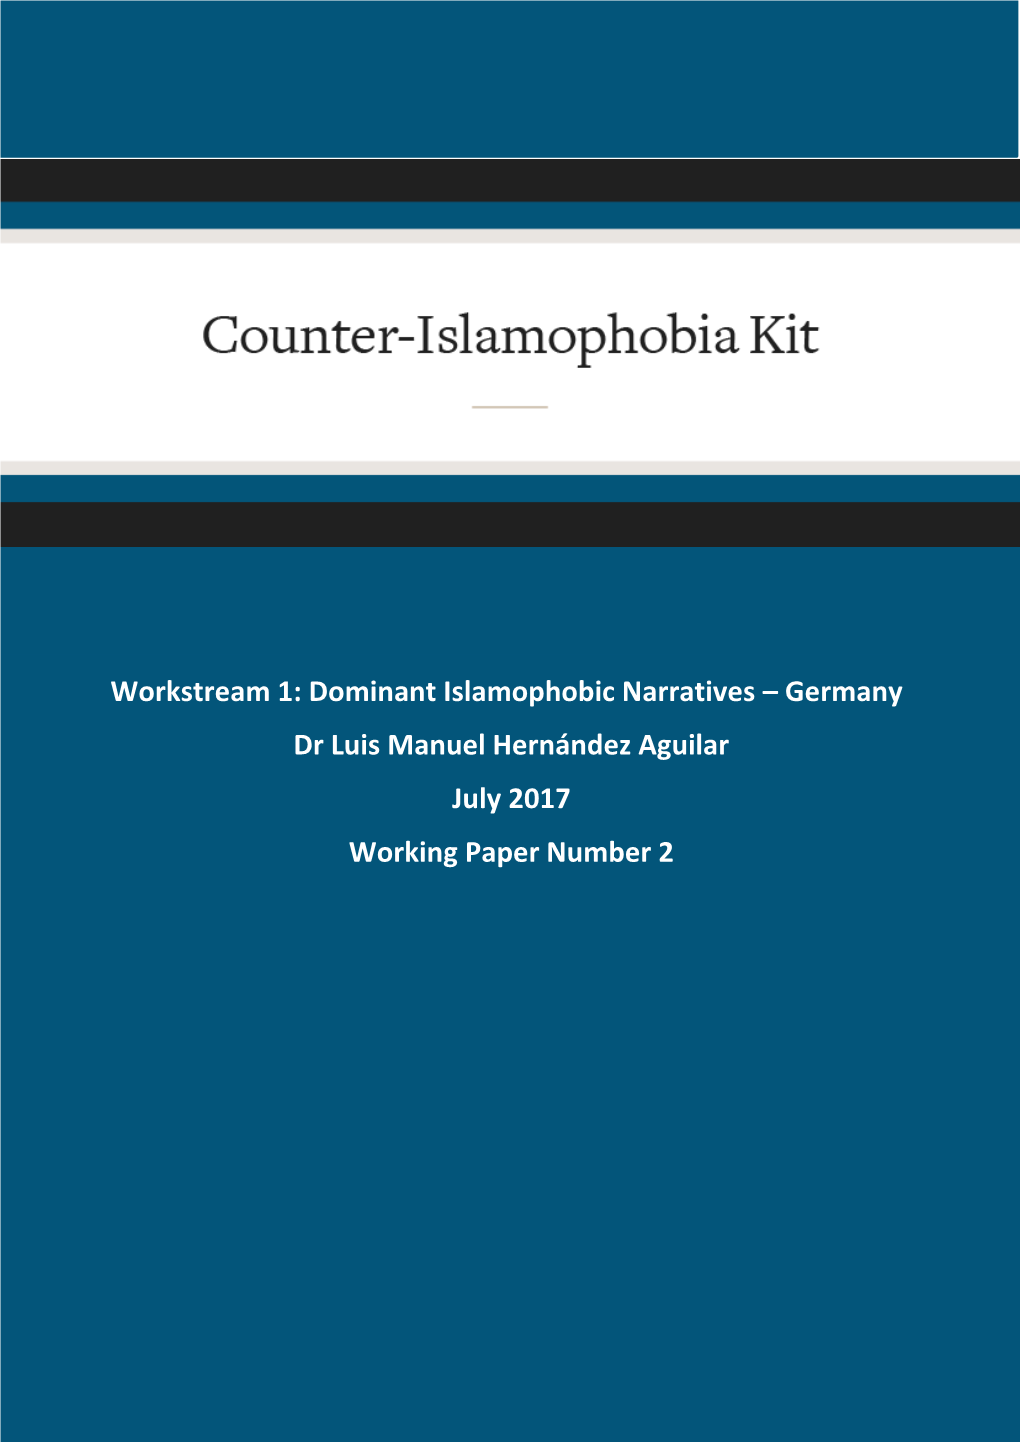 Workstream 1: Dominant Islamophobic Narratives – Germany Dr Luis Manuel Hernández Aguilar July 2017 Working Paper Number 2